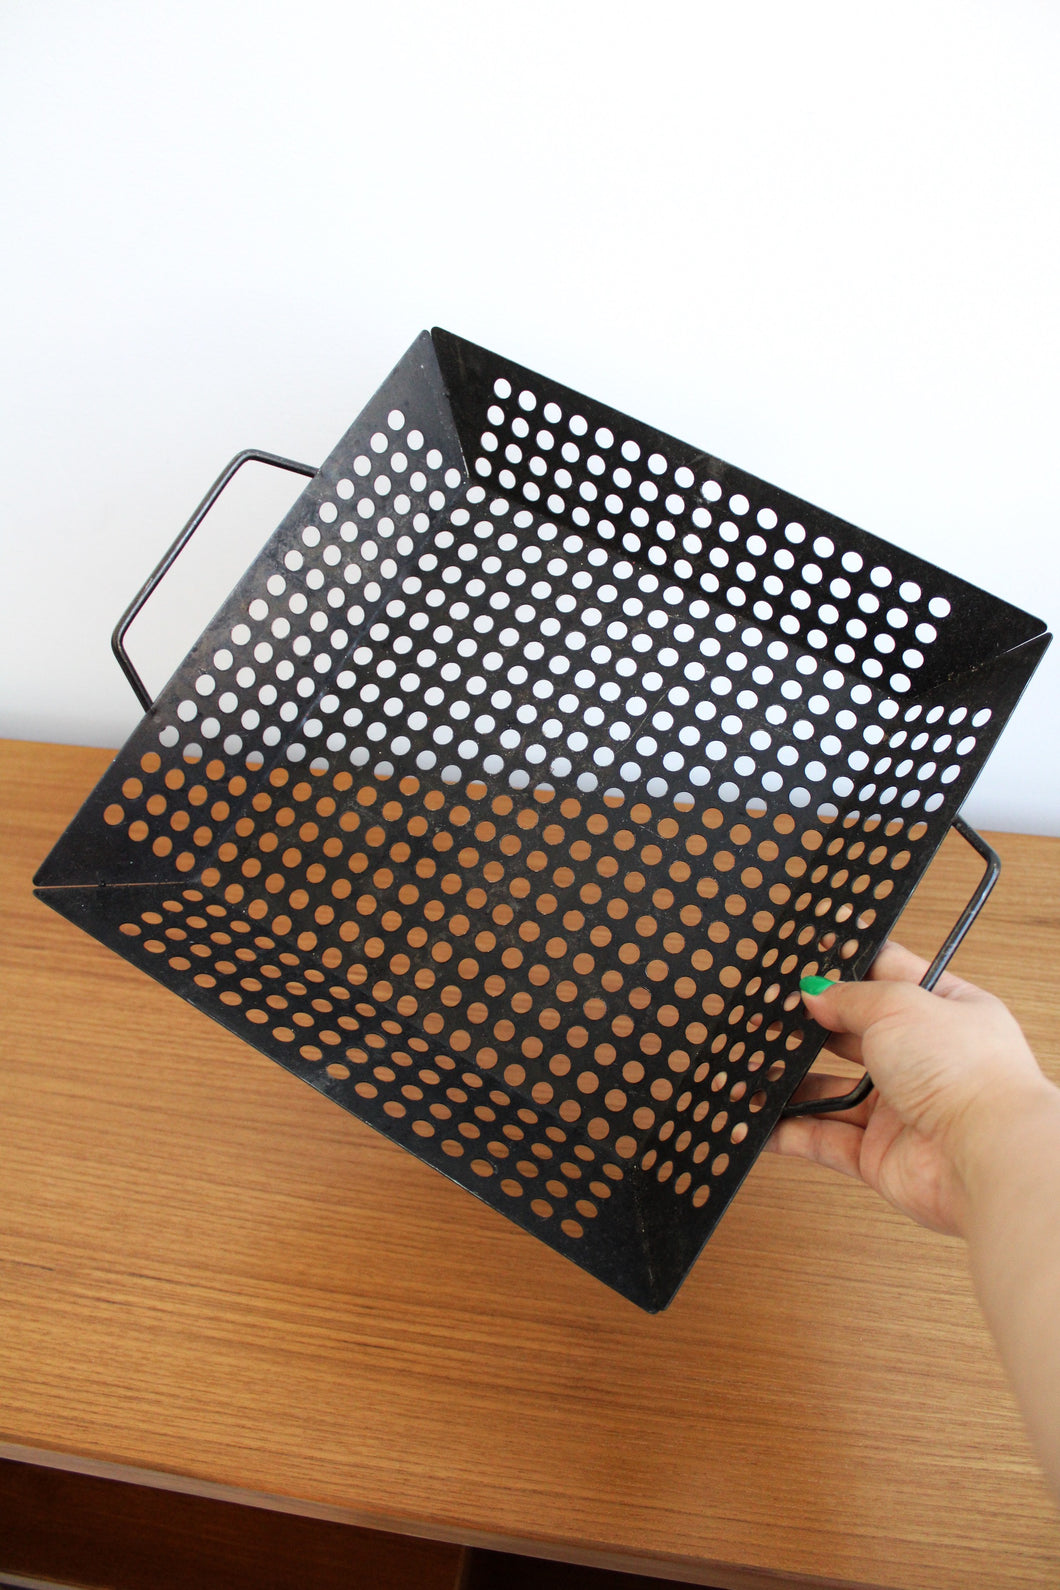 Metal Perforated Tray